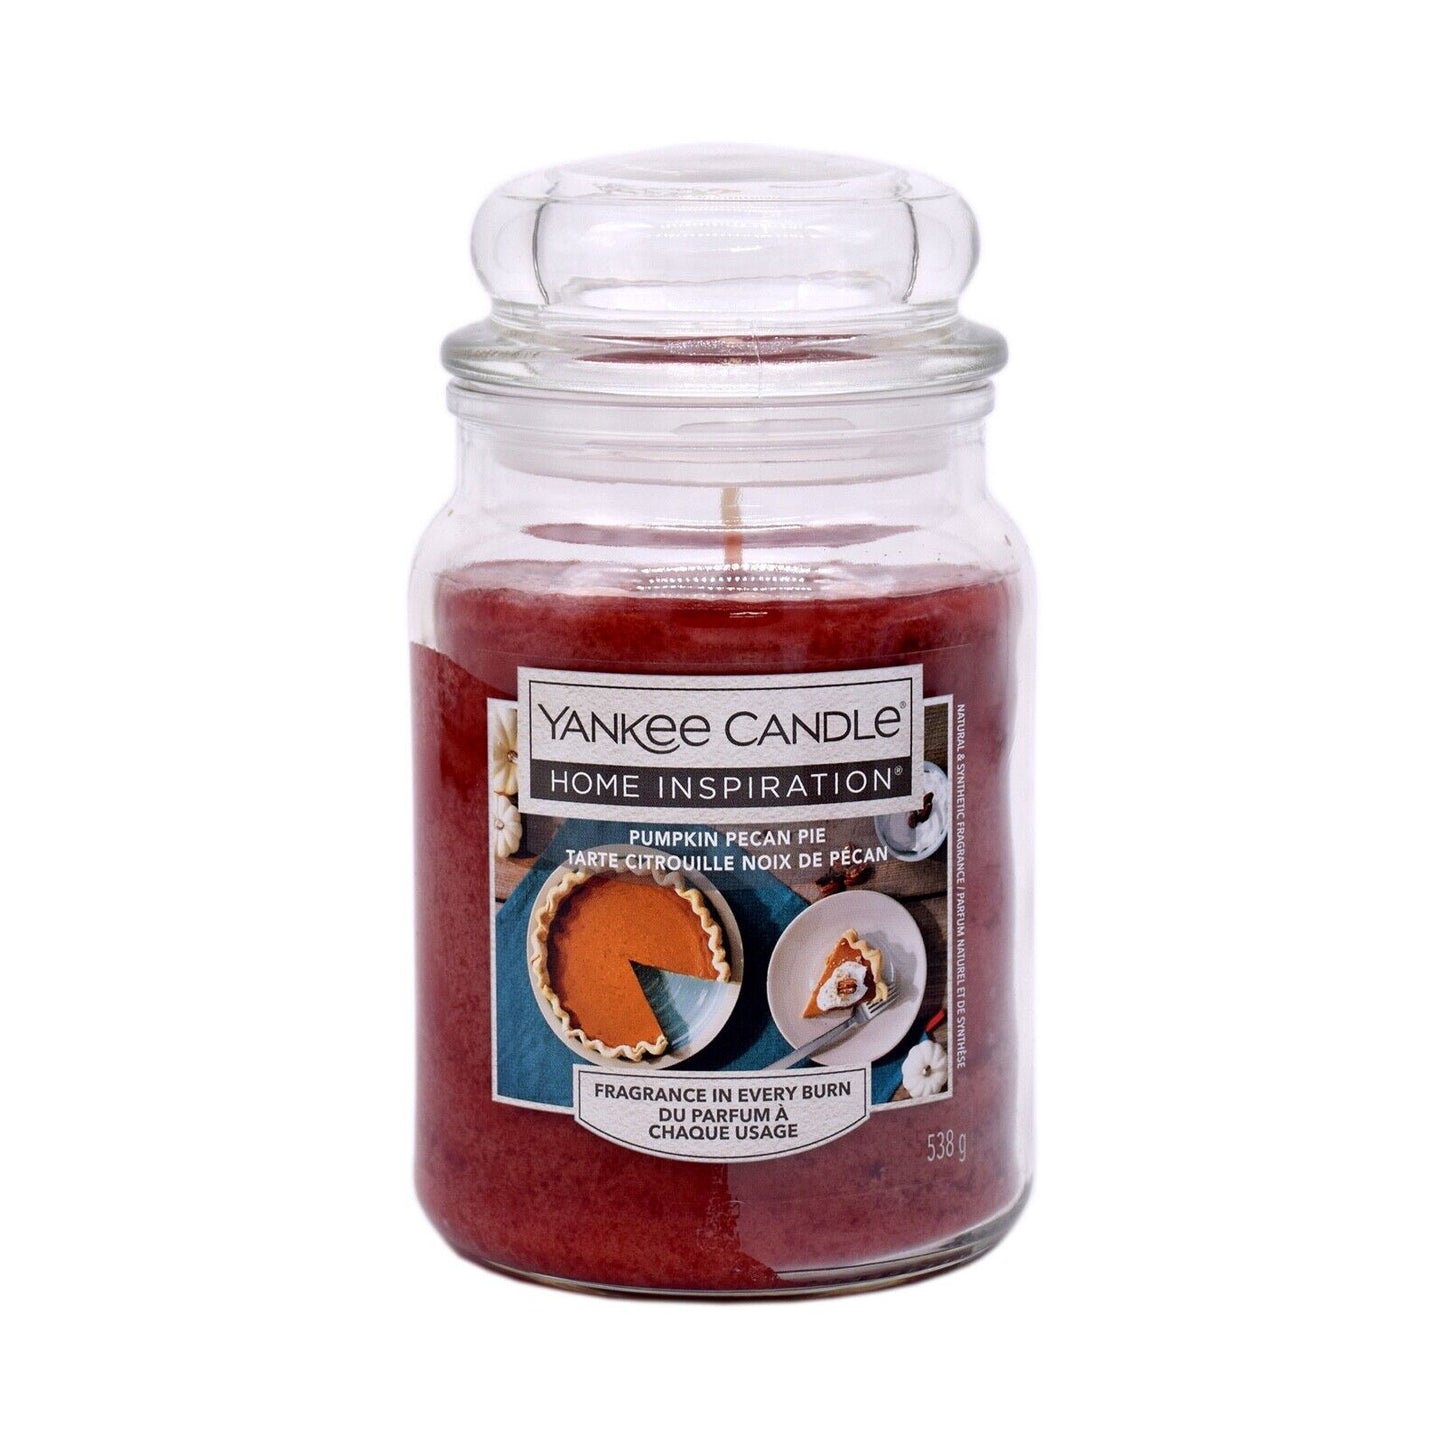 2x Yankee Candle Home Inspiration *Holiday* Large Glass Jar 538g 120hr Burn Time